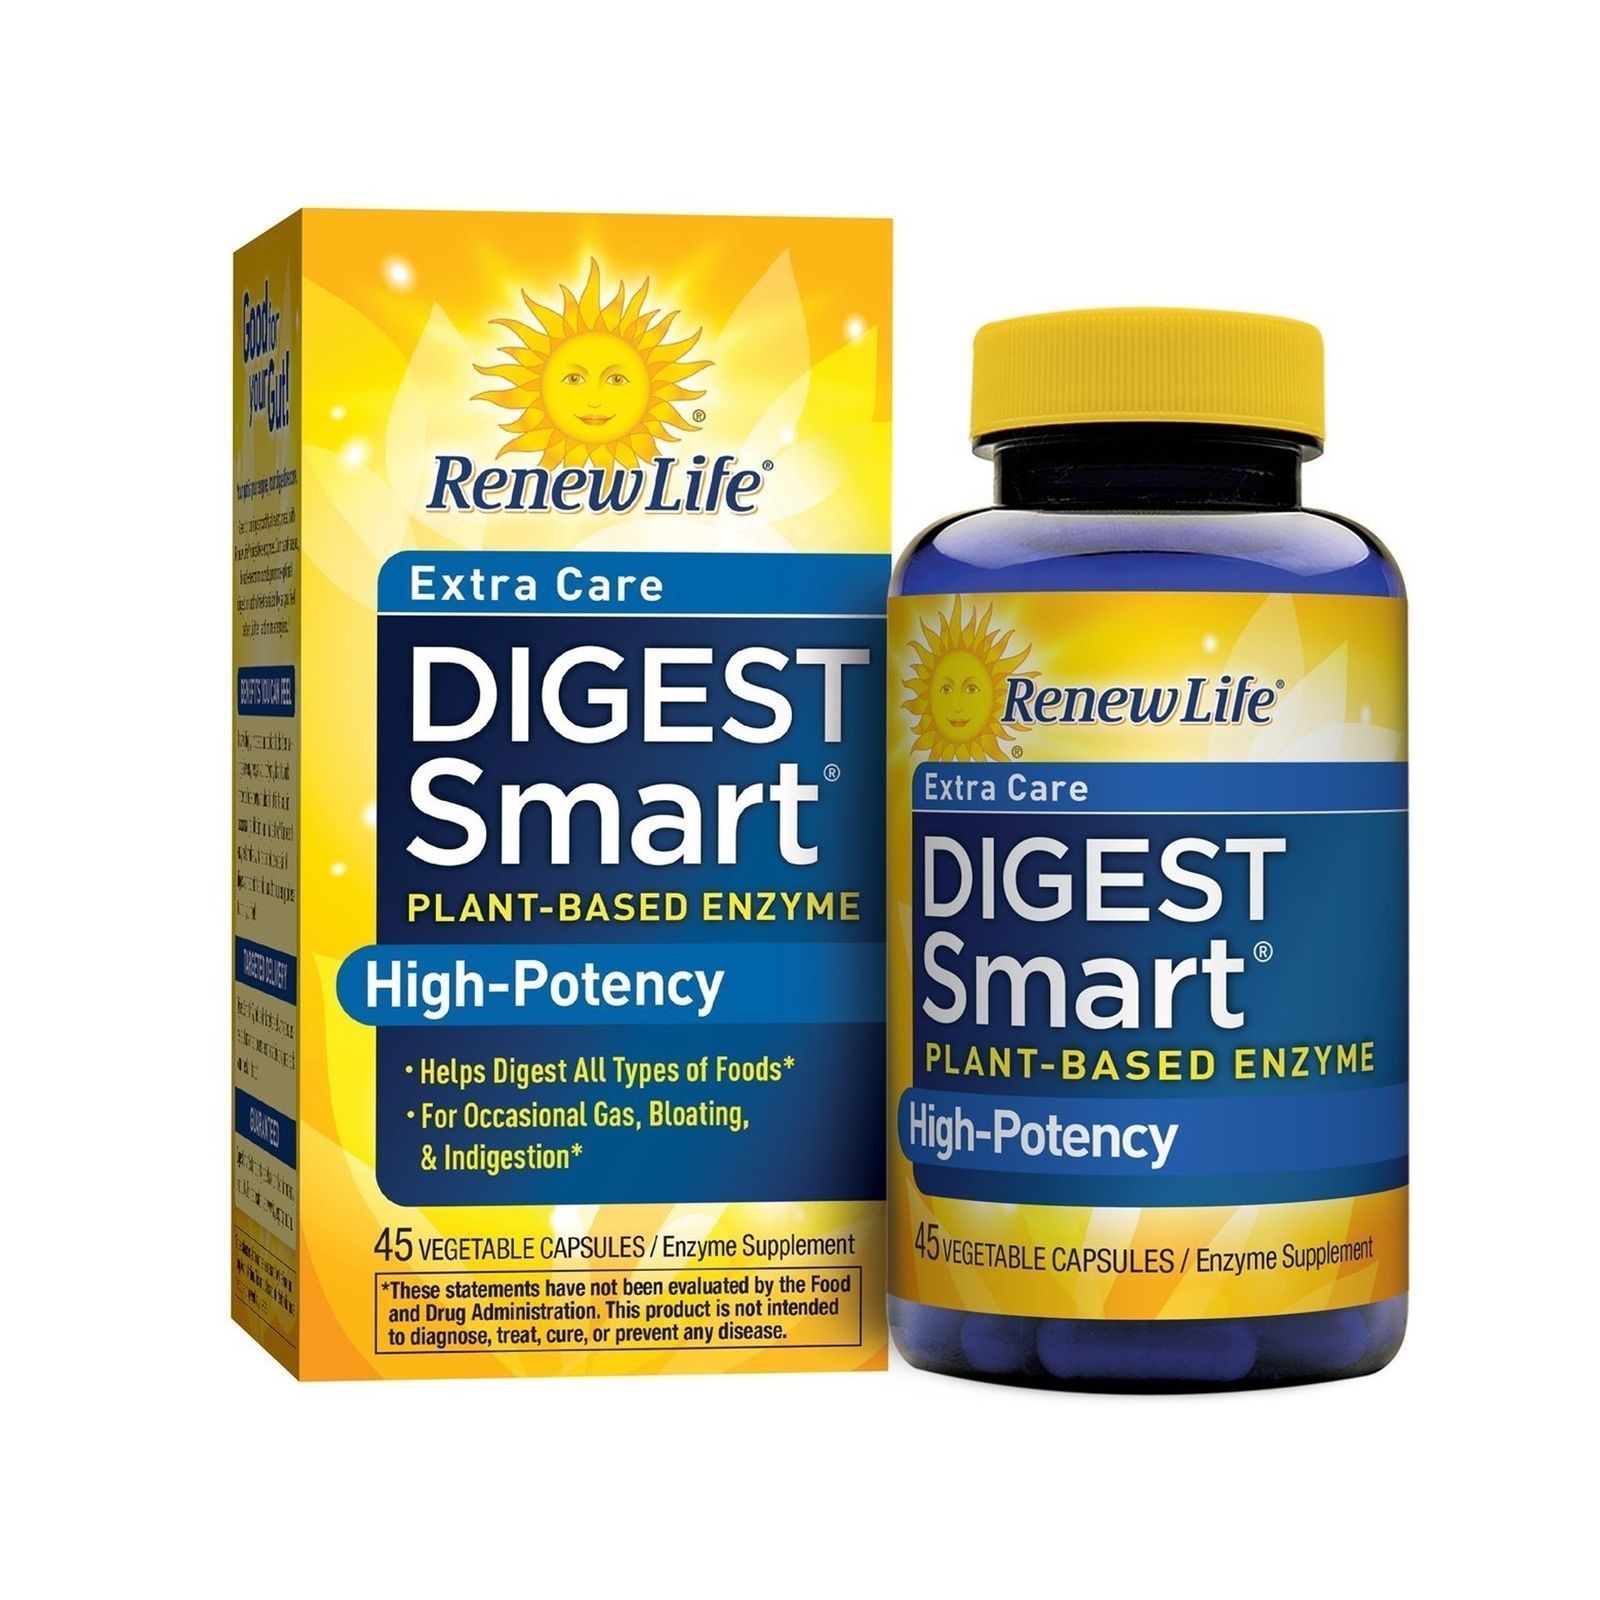 Highest potency vitamin. Digest. Digestive Enzymes. Ферменты дайджест. Caress and Digest.